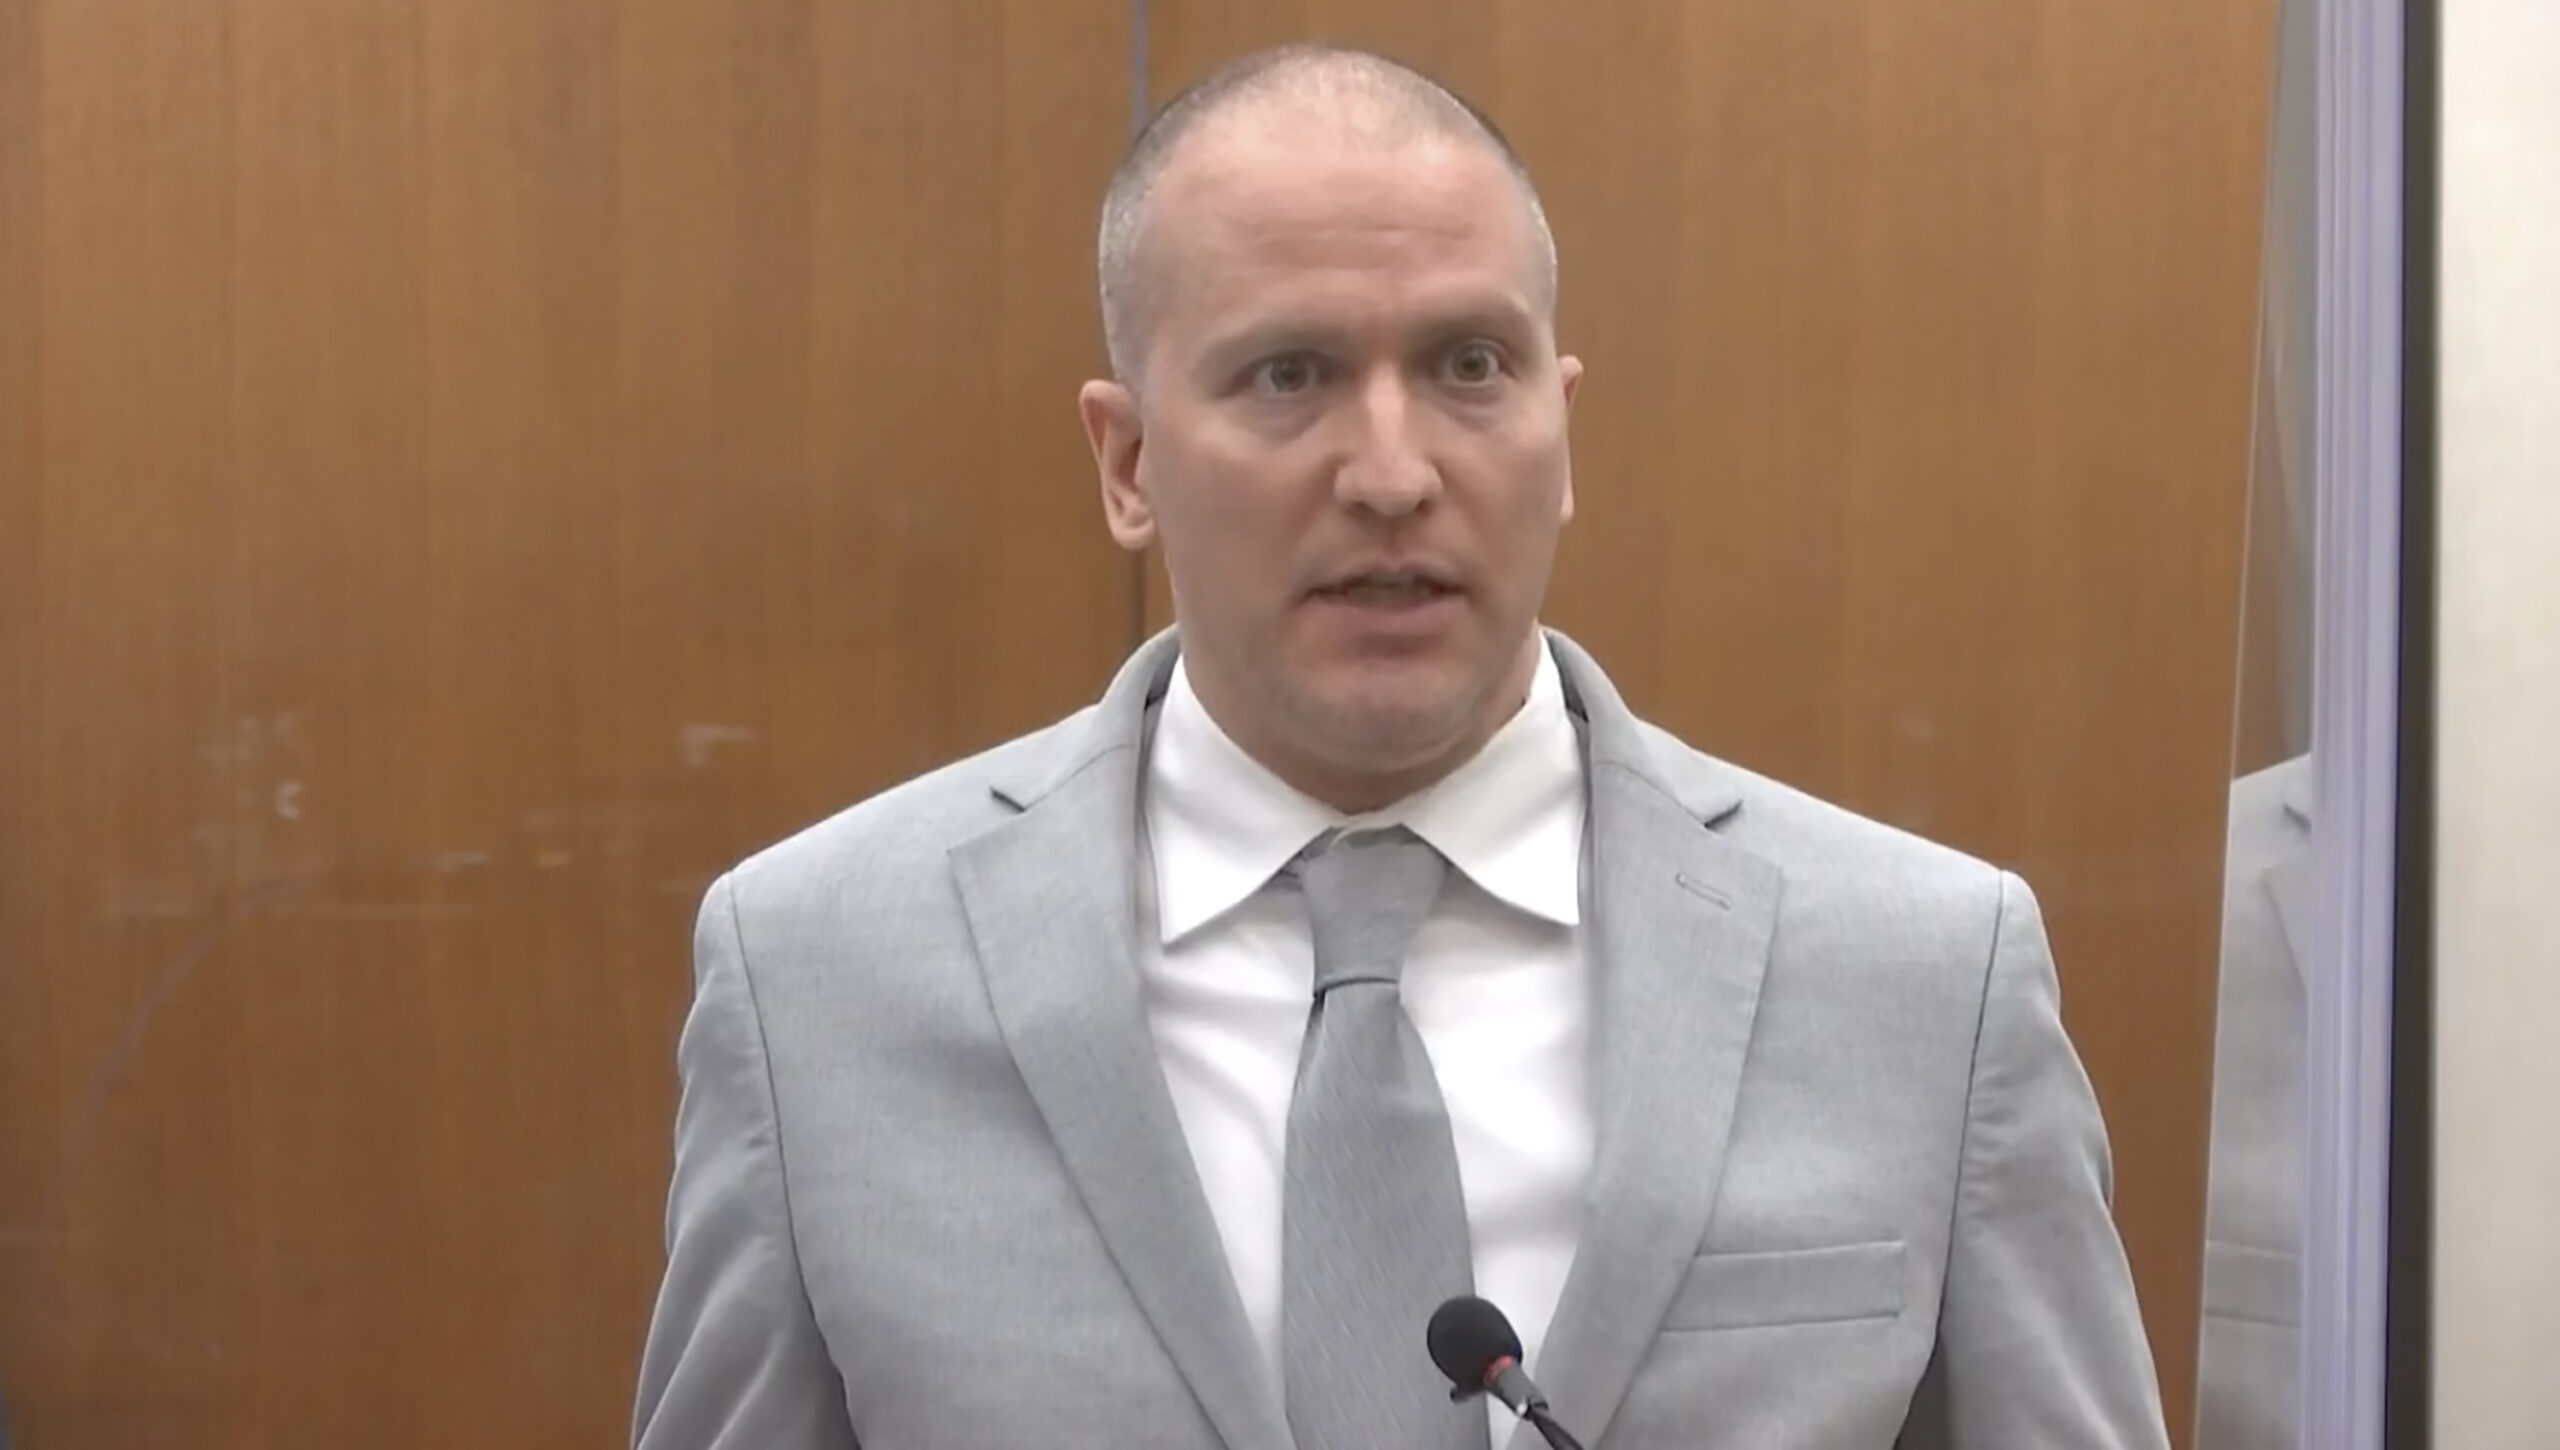 In this image taken from video, former Minneapolis police Officer Derek Chauvin addresses the court as Hennepin County Judge Peter Cahill presides over Chauvin's sentencing, Friday, June 25, 2021, at the Hennepin County Courthouse in Minneapolis. Chauvin faces decades in prison for the May 2020 death of George Floyd. (Court TV via AP, Pool)